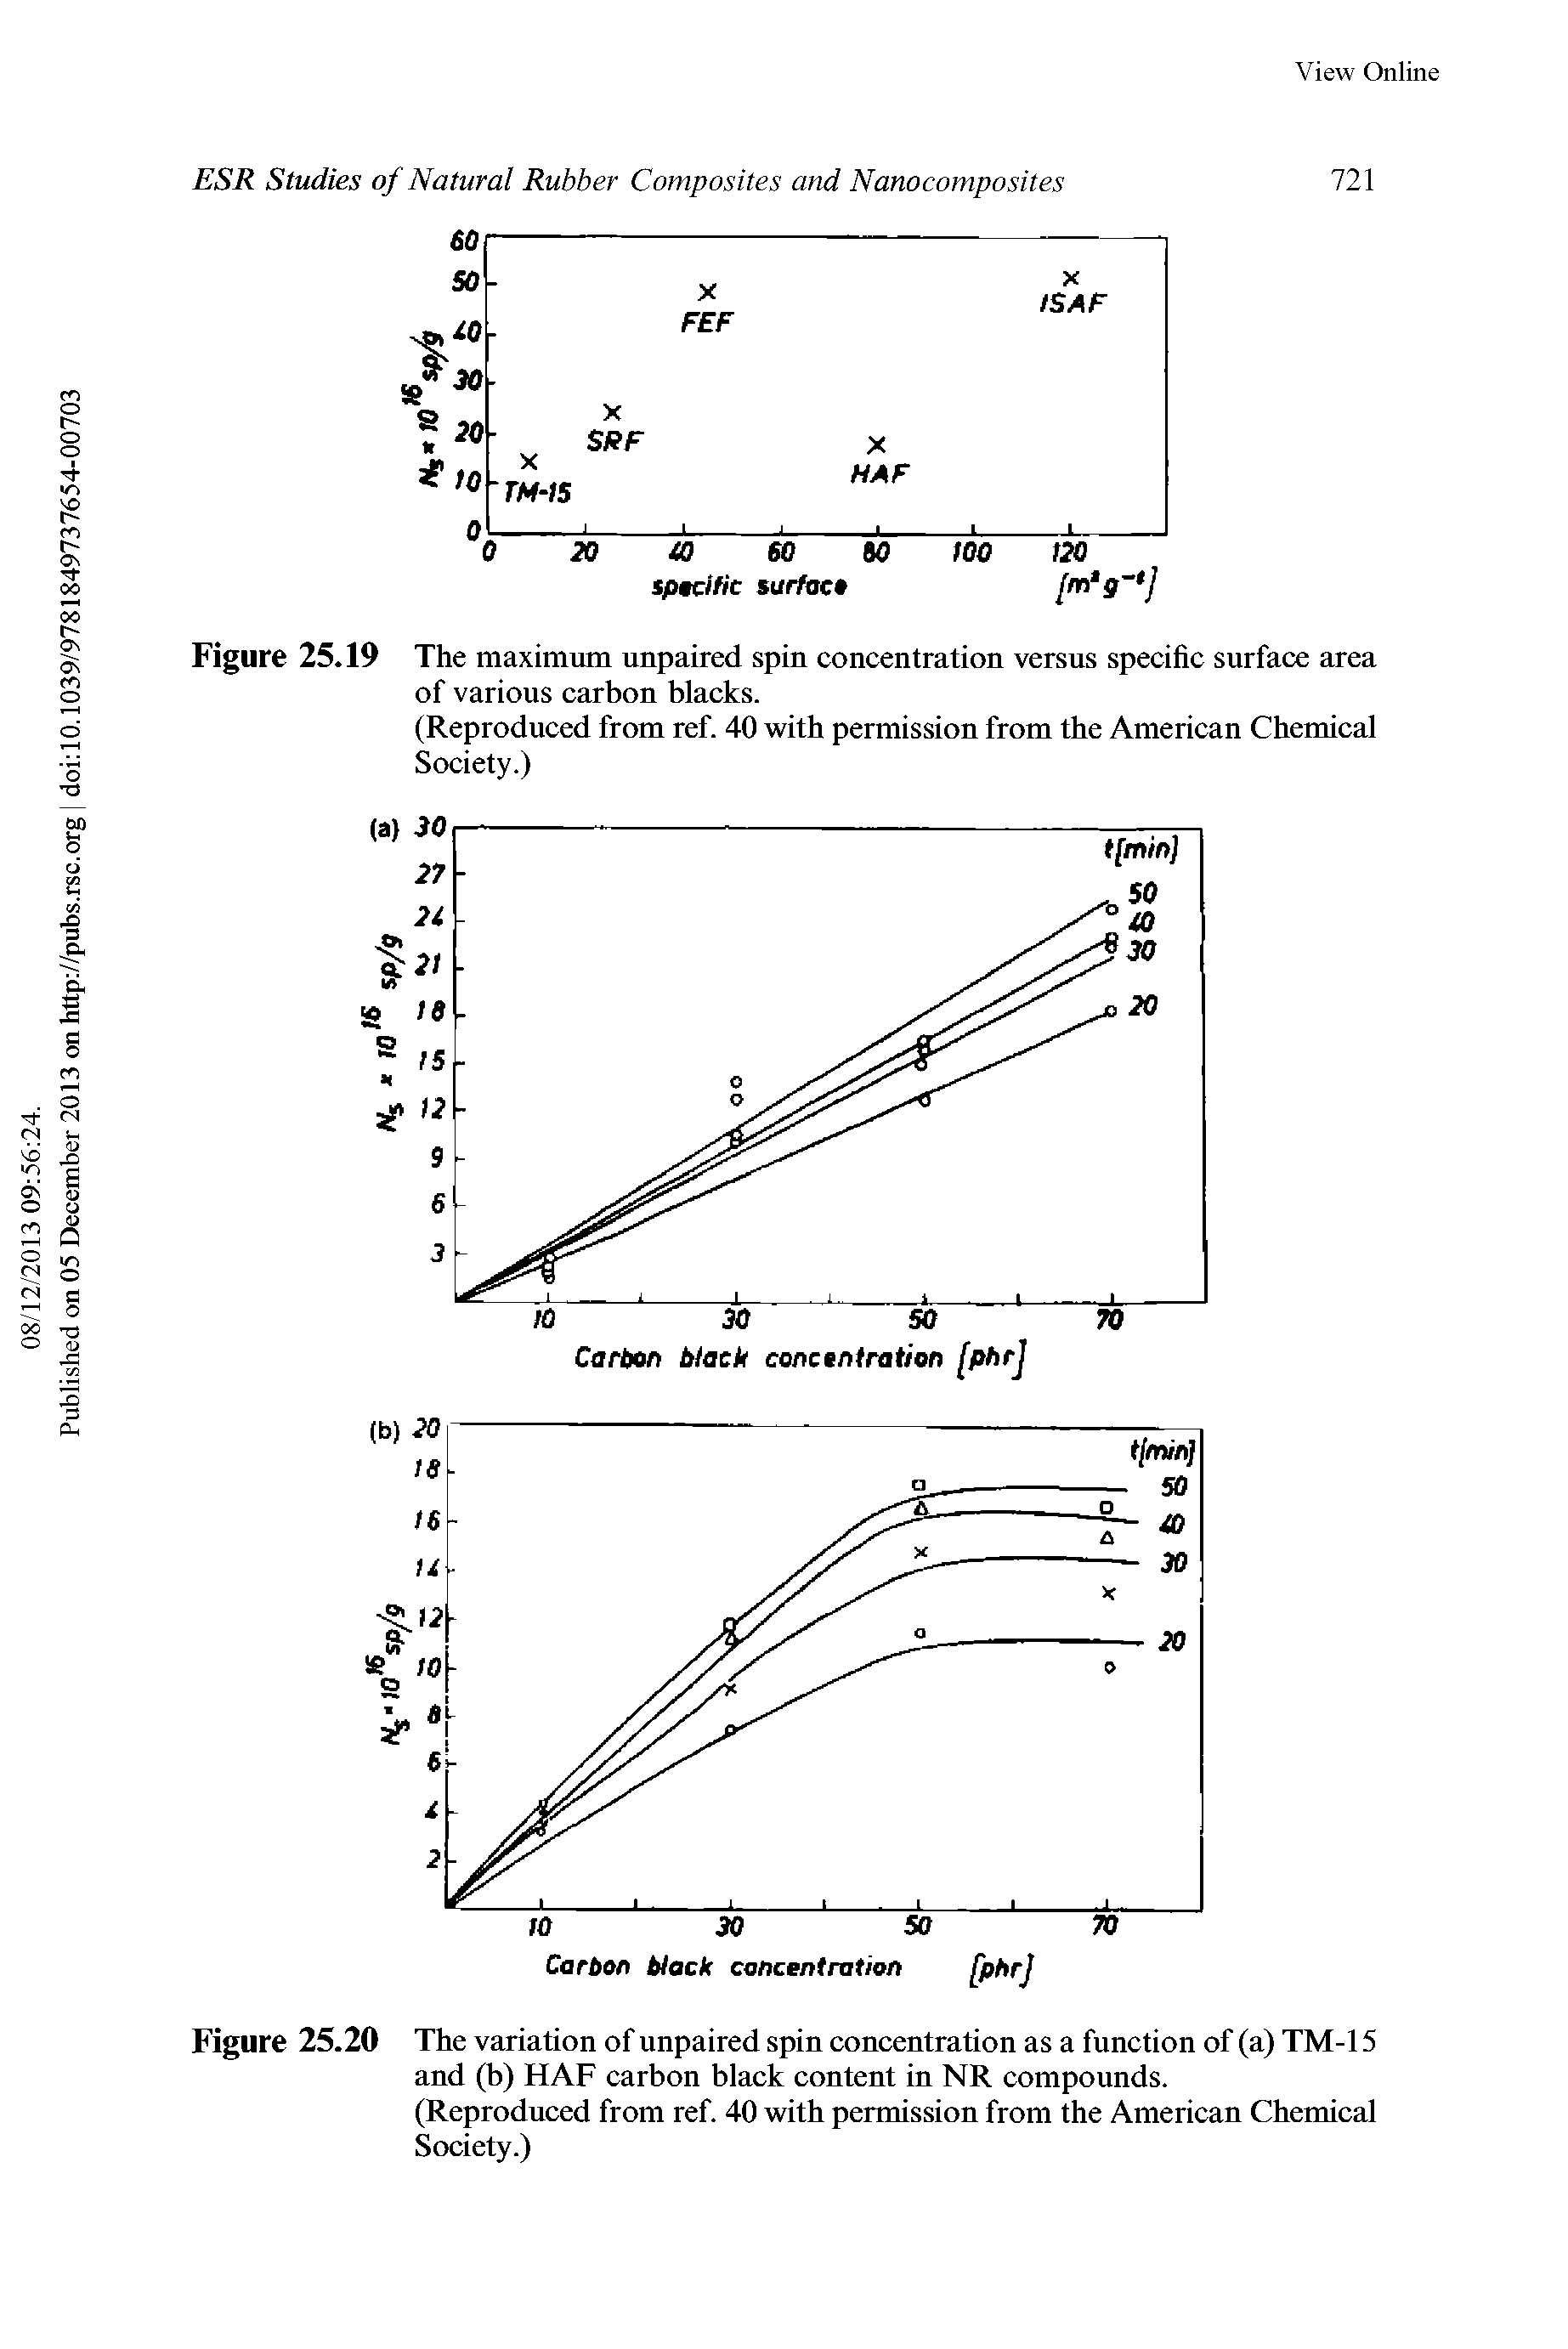 Figure 25.19 The maximum unpaired spin concentration versus specific surface area of various carbon blacks.